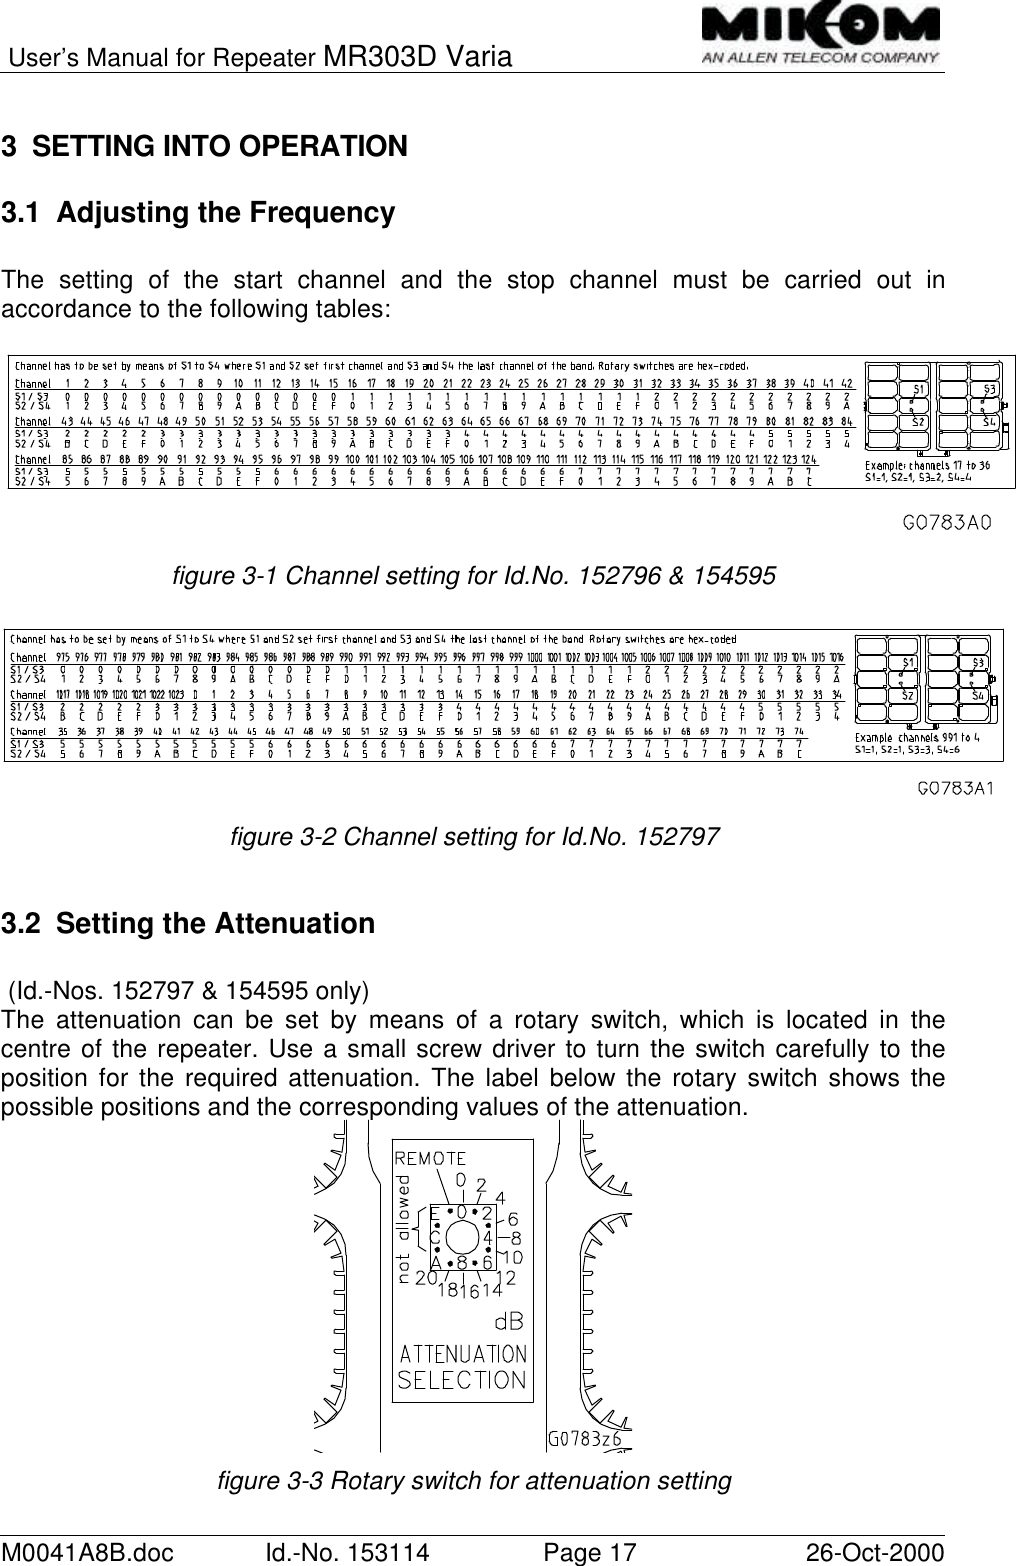 User’s Manual for Repeater MR303D VariaM0041A8B.doc Id.-No. 153114 Page 17 26-Oct-20003 SETTING INTO OPERATION3.1 Adjusting the FrequencyThe setting of the start channel and the stop channel must be carried out inaccordance to the following tables:figure 3-1 Channel setting for Id.No. 152796 &amp; 154595figure 3-2 Channel setting for Id.No. 1527973.2 Setting the Attenuation (Id.-Nos. 152797 &amp; 154595 only)The attenuation can be set by means of a rotary switch, which is located in thecentre of the repeater. Use a small screw driver to turn the switch carefully to theposition for the required attenuation. The label below the rotary switch shows thepossible positions and the corresponding values of the attenuation.figure 3-3 Rotary switch for attenuation setting